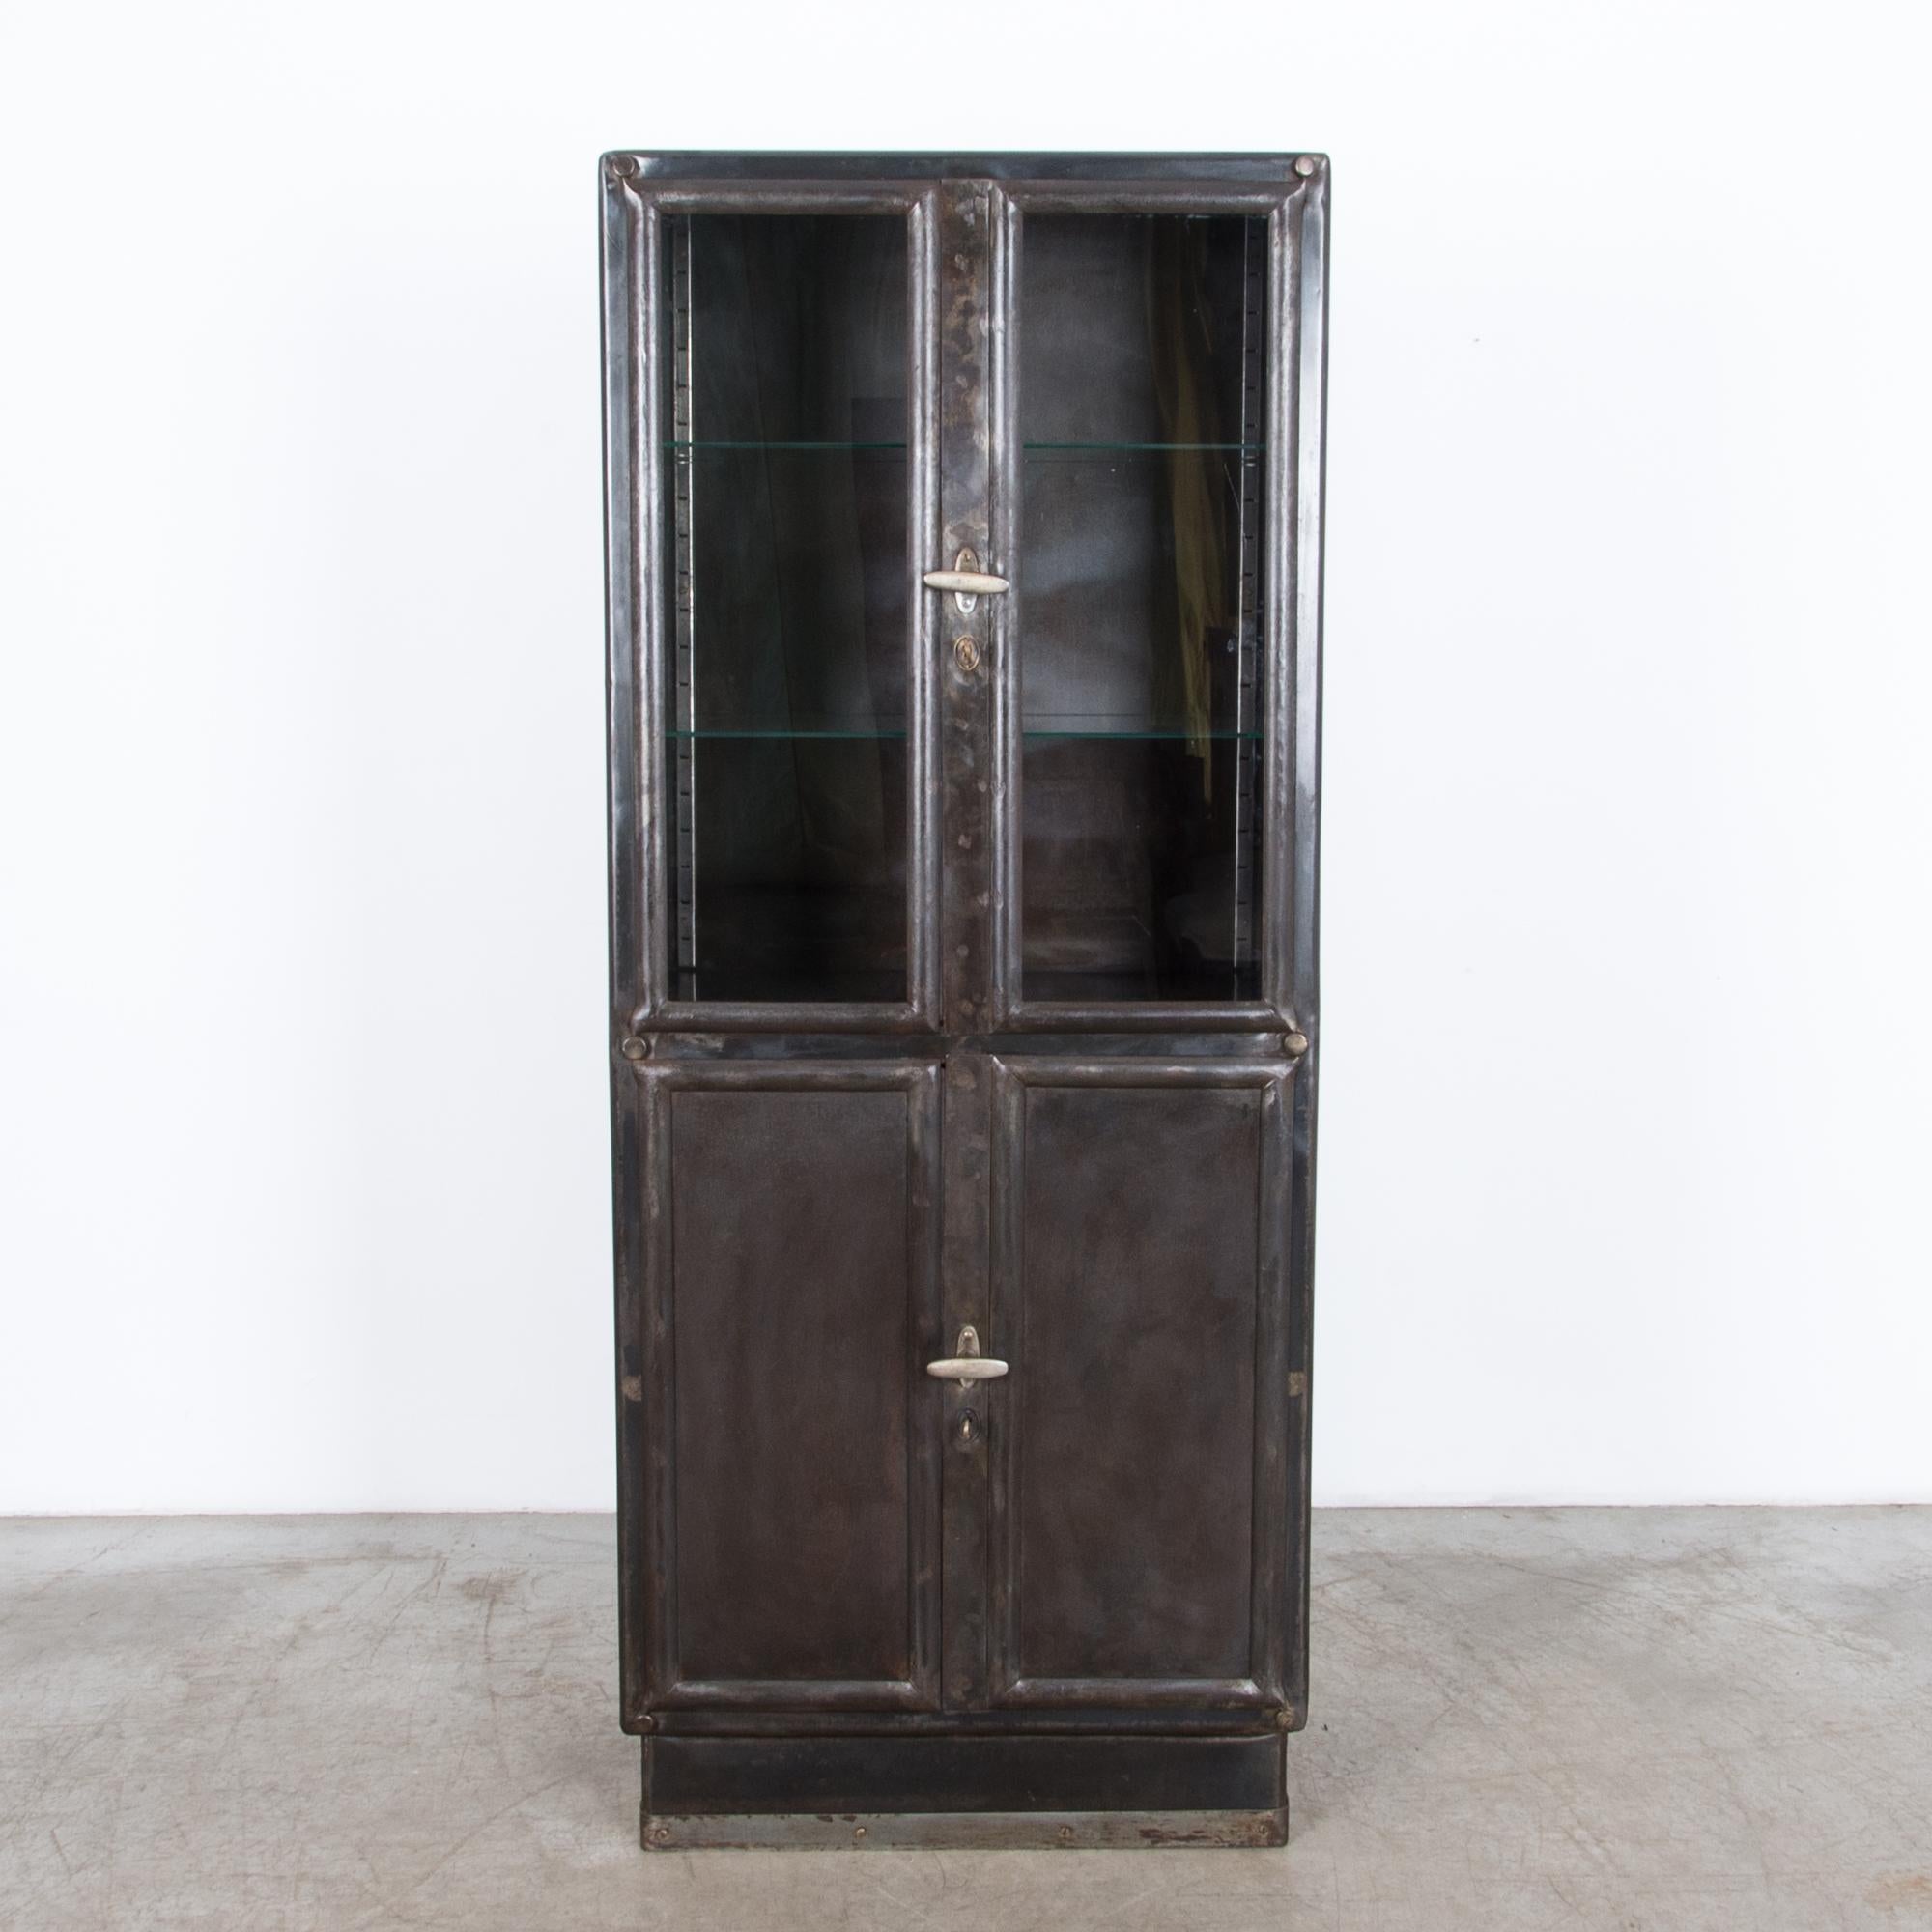 A four-door metal vitrine from Czech Republic, circa 1930. This polished steel cabinet was
originally designed for Industrial use, it features durable locking hardware and purpose built steel construction. The glass interior shelves, and textured